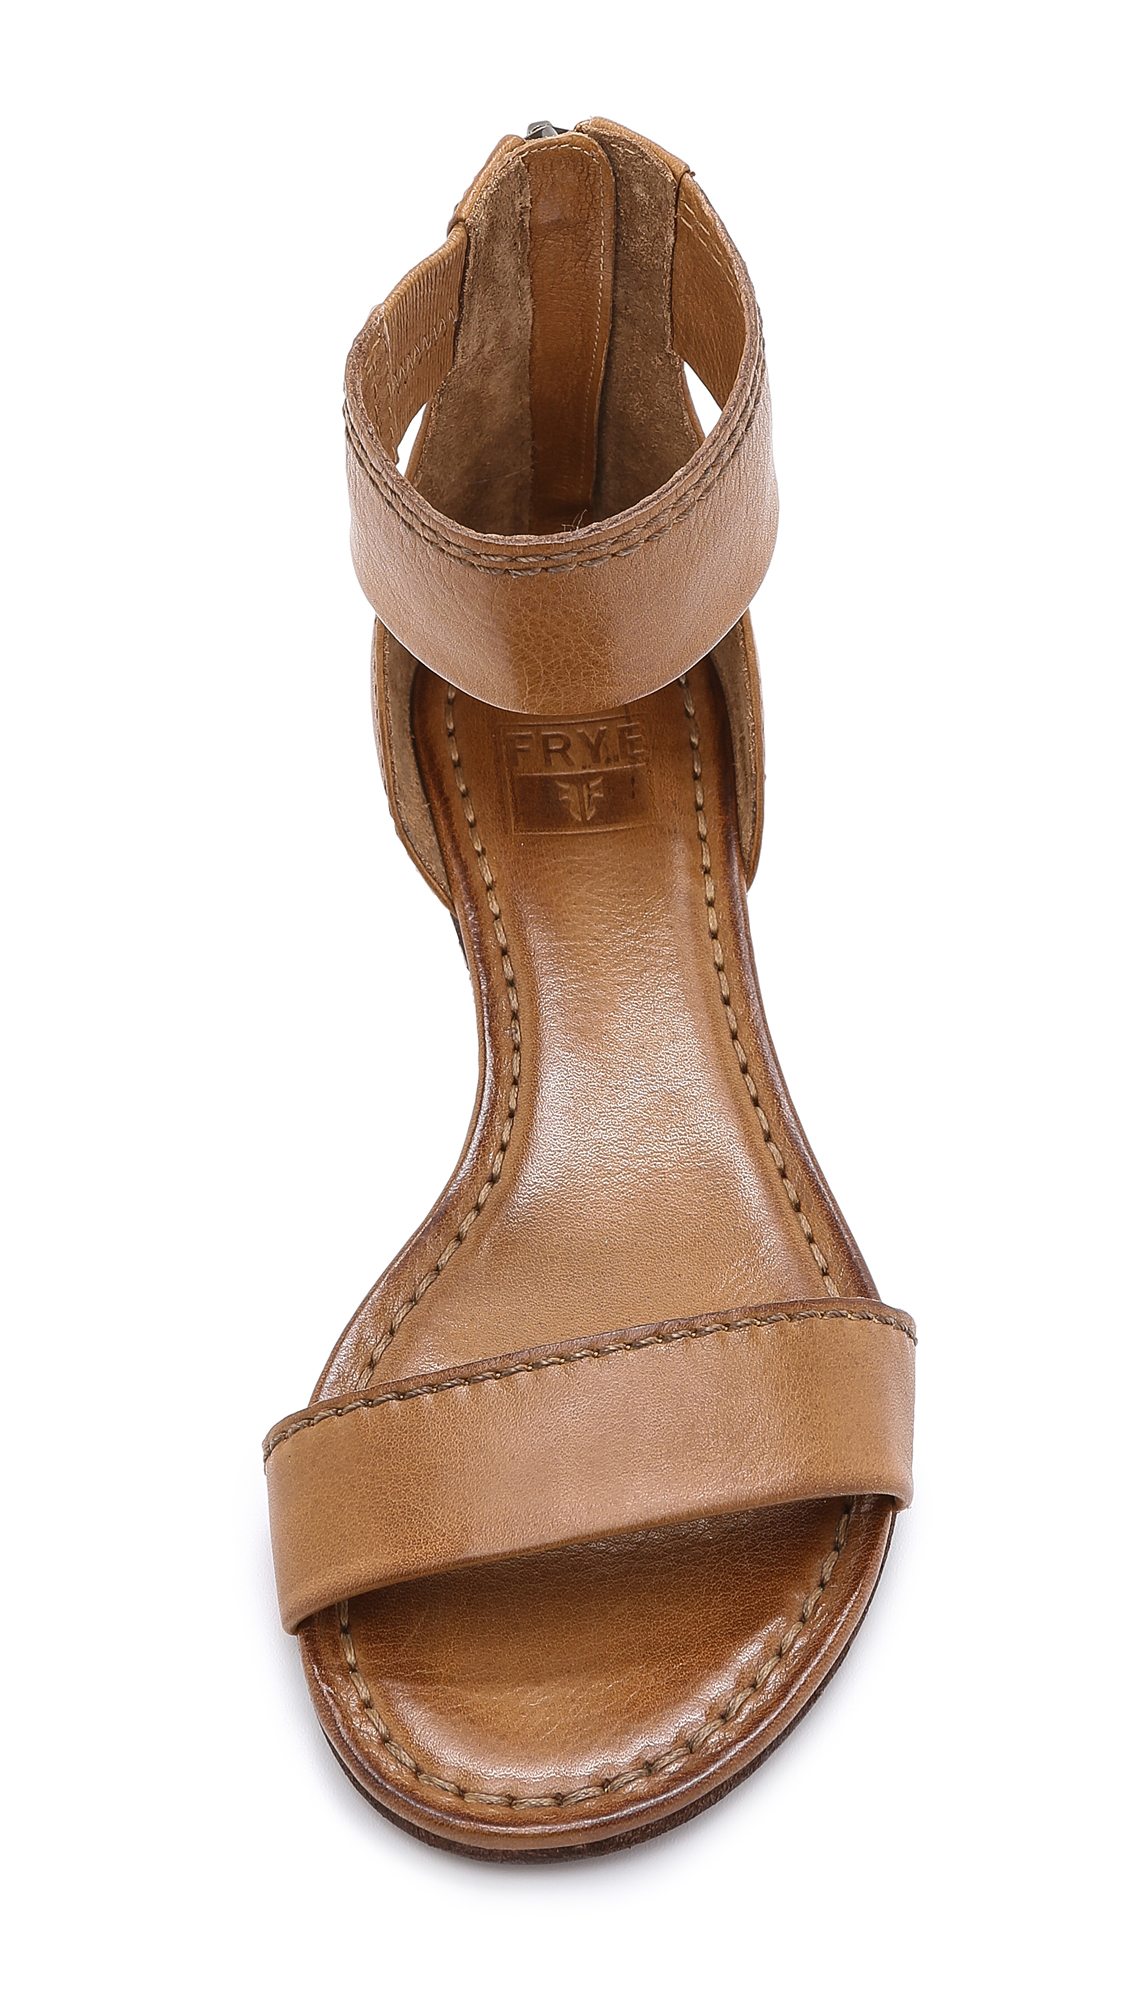 Lyst - Frye Carson Ankle Zip Flat Sandals - Camel in Natural